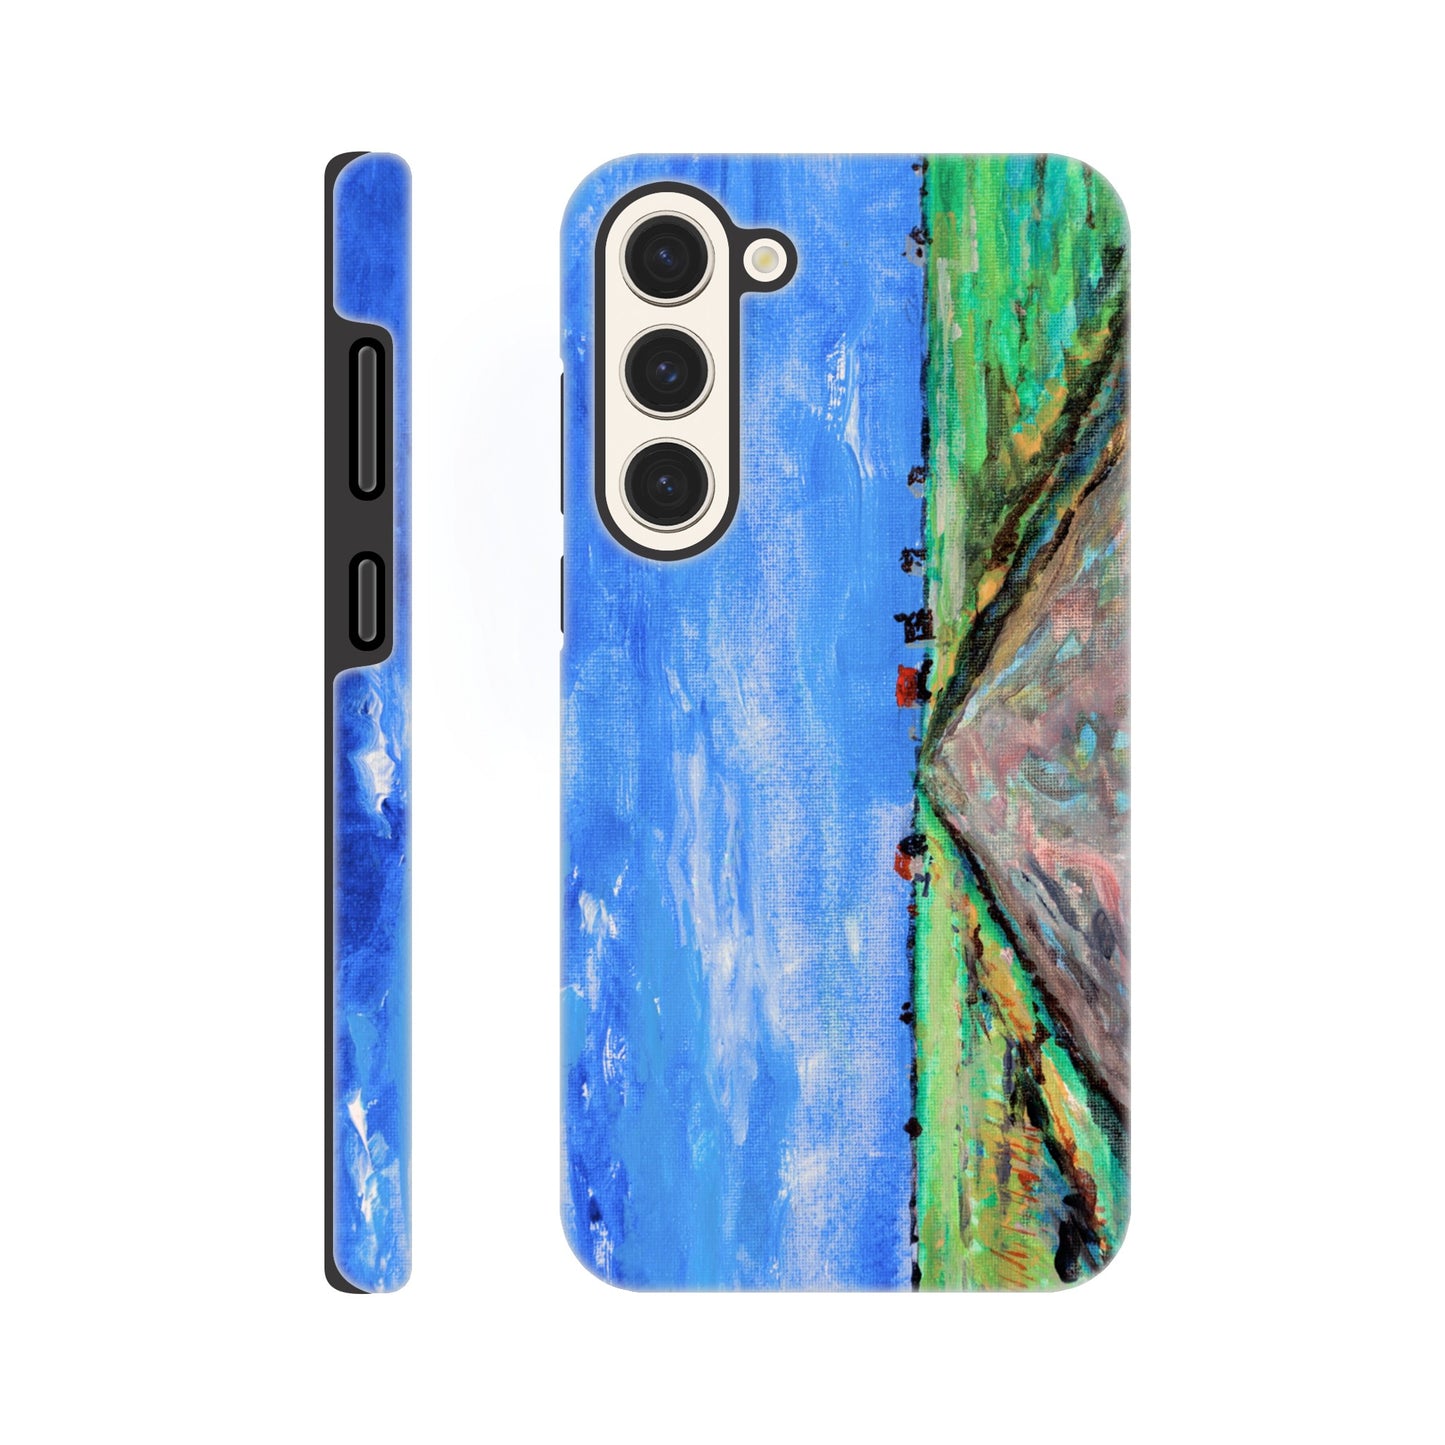 Down the Road - Phone cases